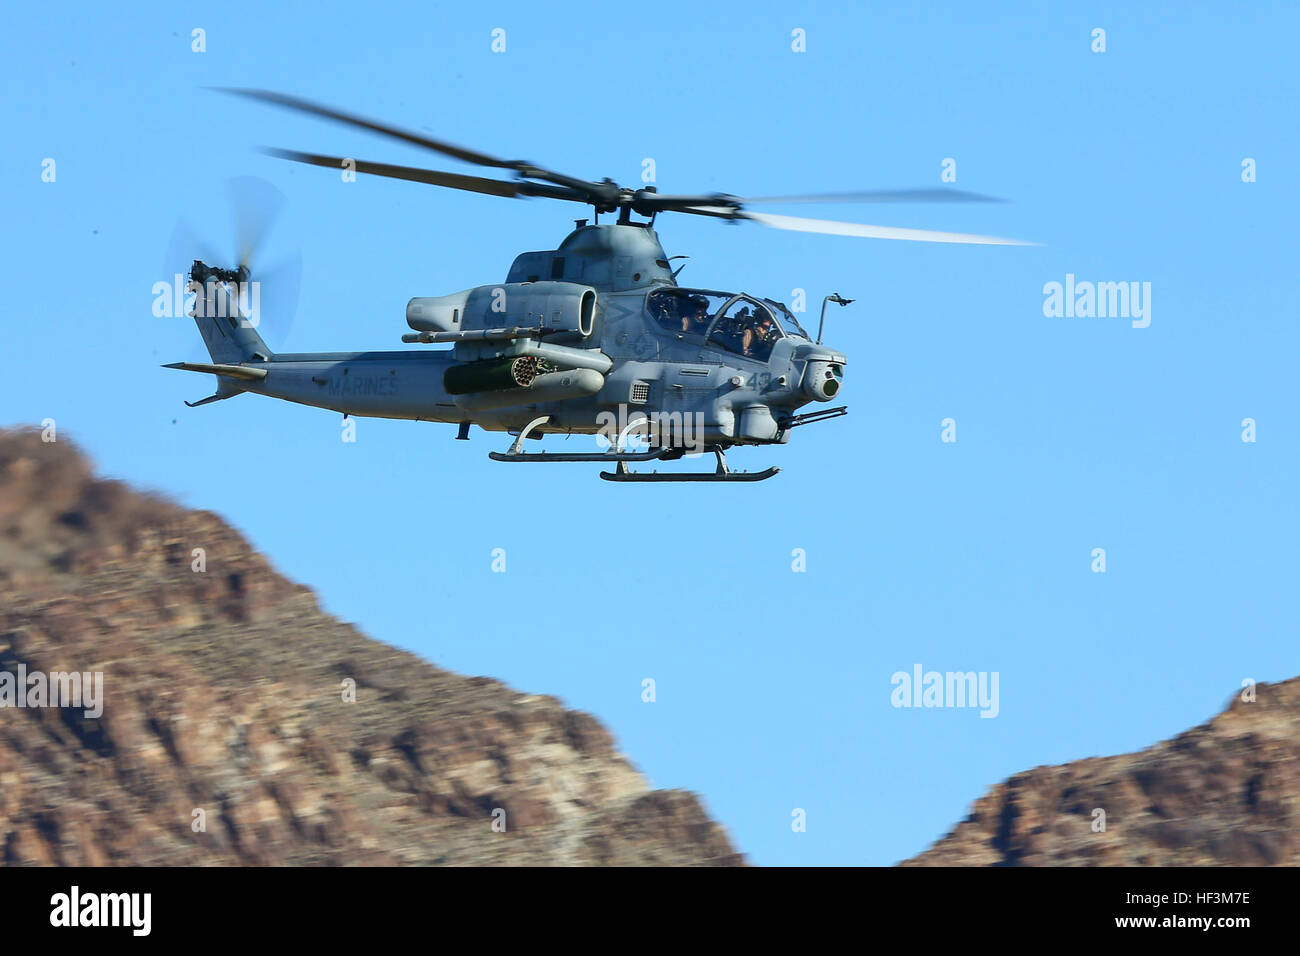 A U.S. Marine Corps AH-1Z Viper assigned to Marine Aviation Weapons and Tactics Squadron One (MAWTS-1) conducts an offensive air support exercise at Mt. Barrow, Chocolate Mountain Aerial Gunnery Range, Calif., Oct. 6, 2015. The exercise is part of Weapons and Tactics Instructor (WTI) 1-16, a seven-week training event hosted by MAWTS-1 cadre. MAWTS-1 provides standardized tactical training and certification of unit instructor qualifications to support Marine Aviation Training and Readiness and assists in developing and employing aviation weapons and tactics. (U.S. Marine Corps photograph by SSg Stock Photo